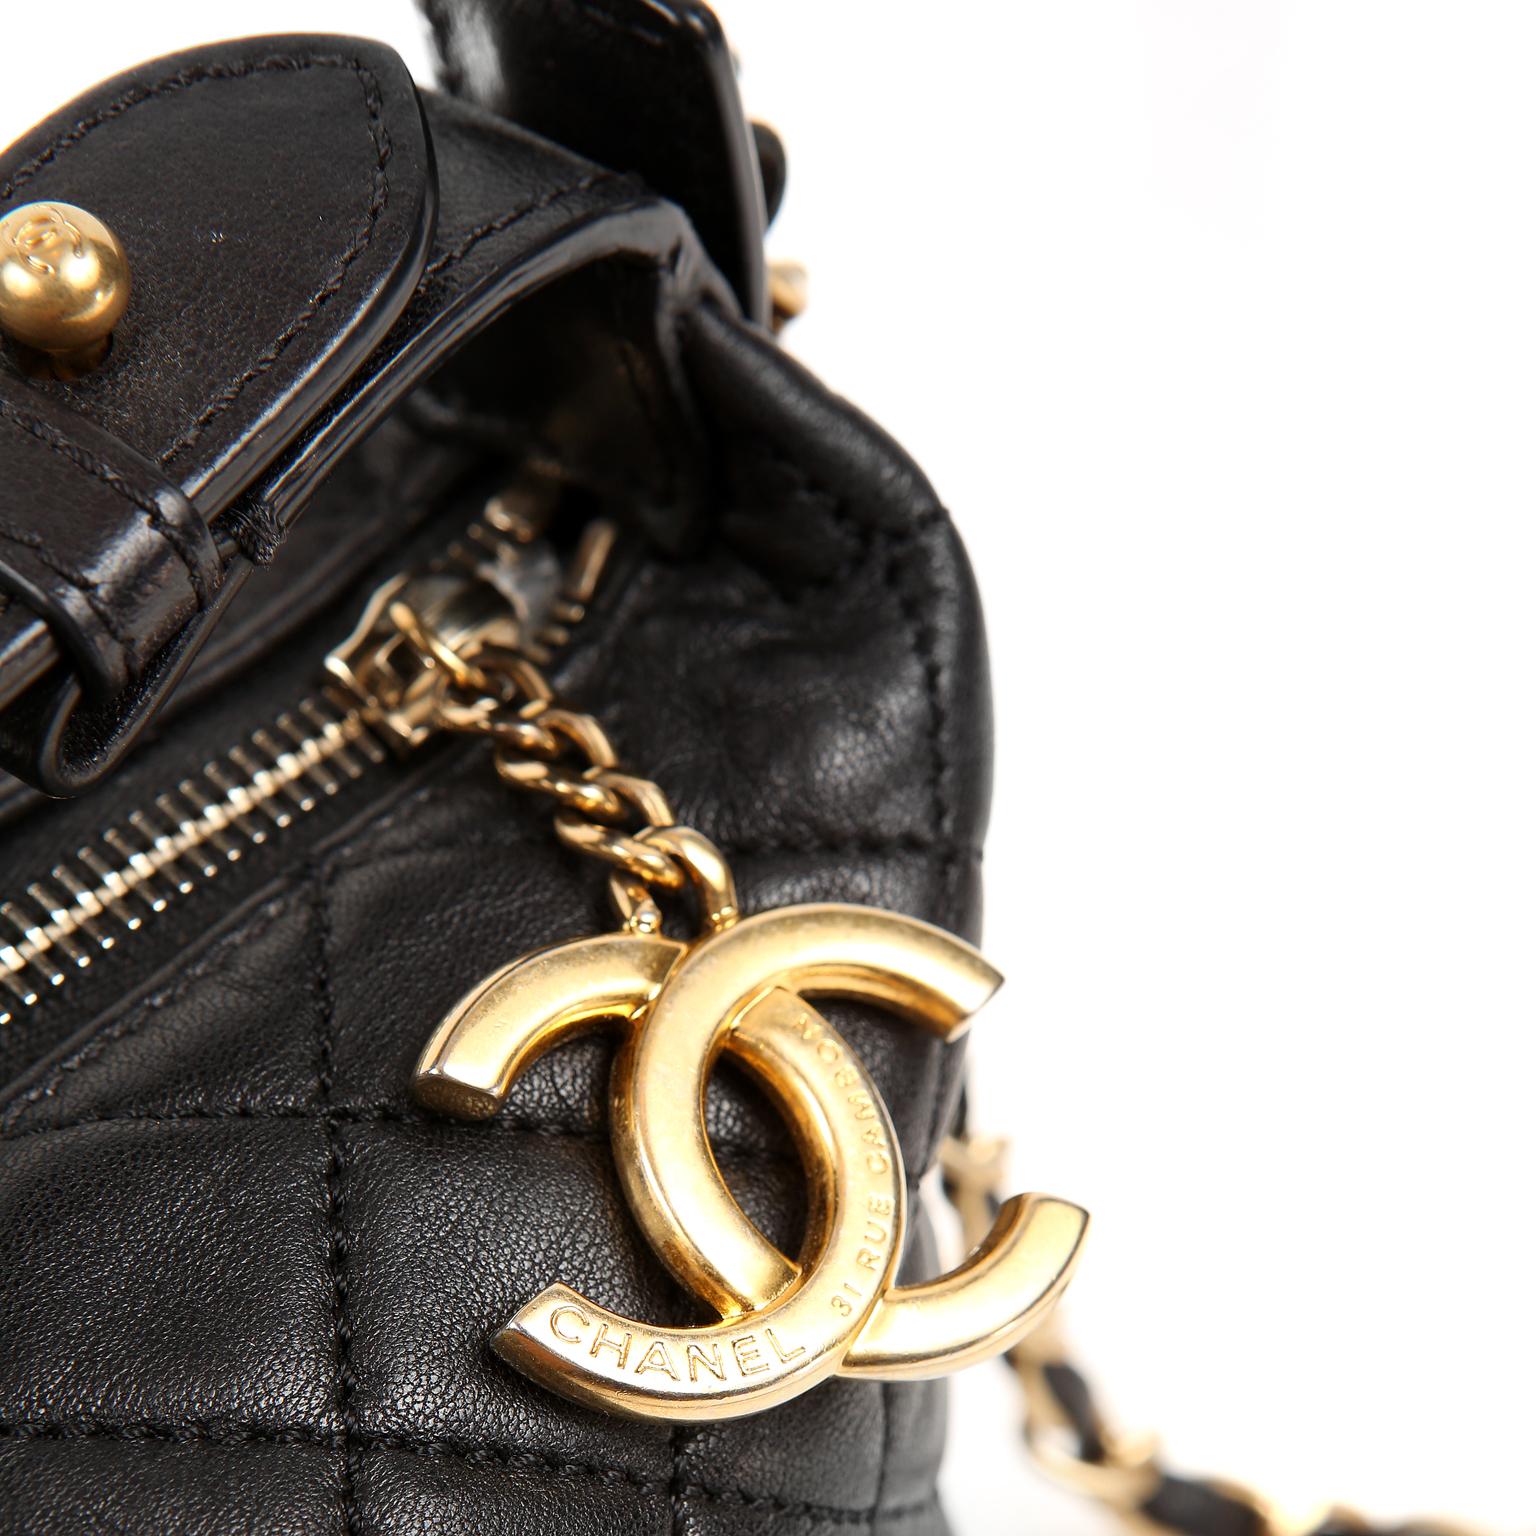 Women's Chanel Black Quilted Leather Crossbody Bag